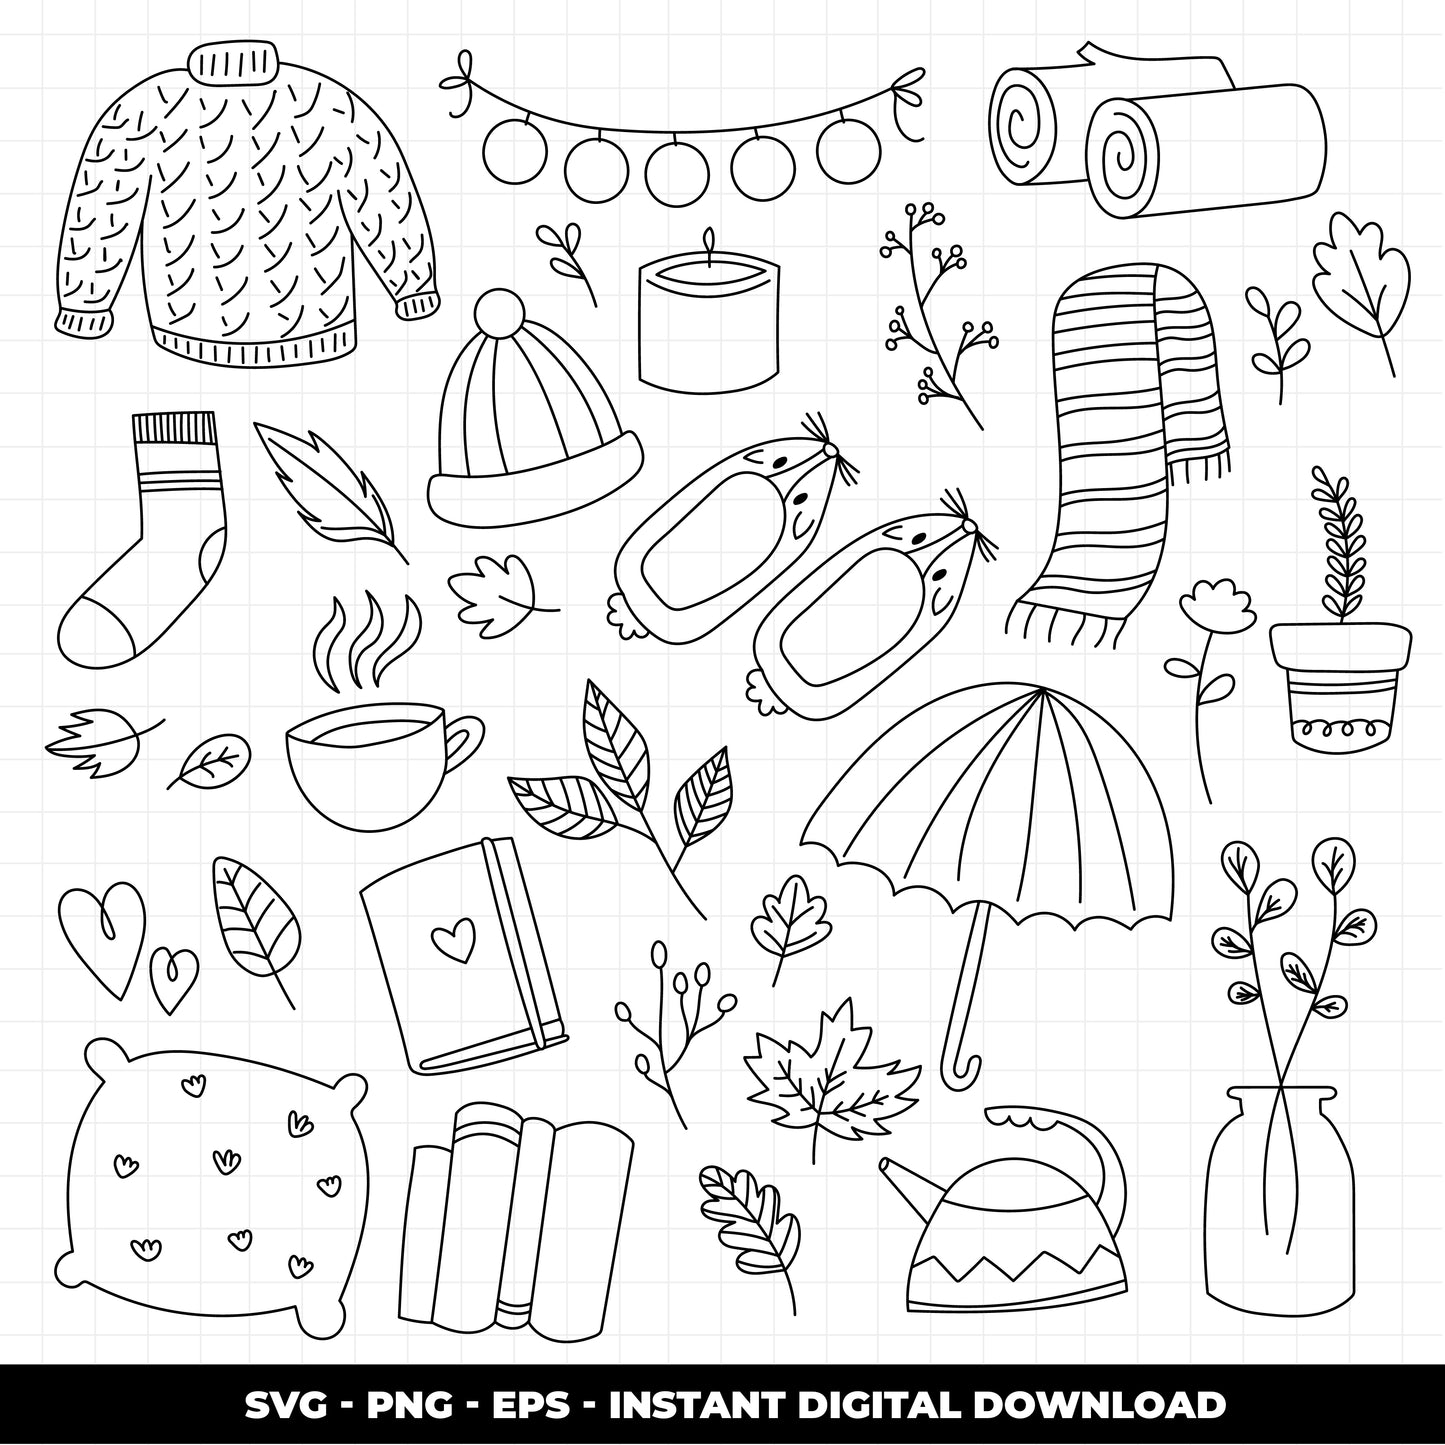 COD937 Autumn svg, fall clipart, Leaves clipart, Plants svg, fall svg, cozy doodle svg